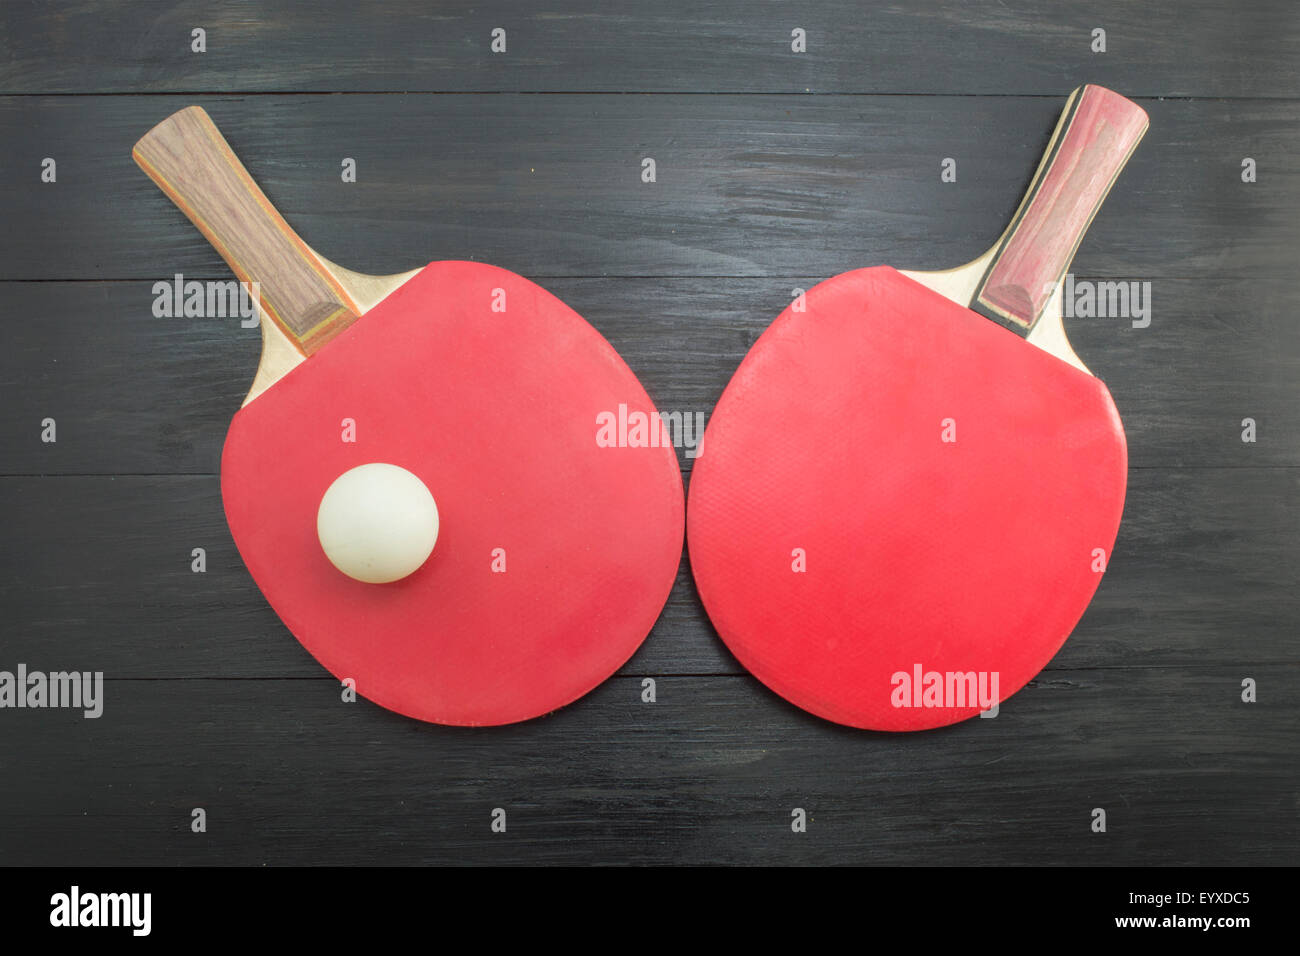 Pair of red table tennis paddles on dark background Stock Photo